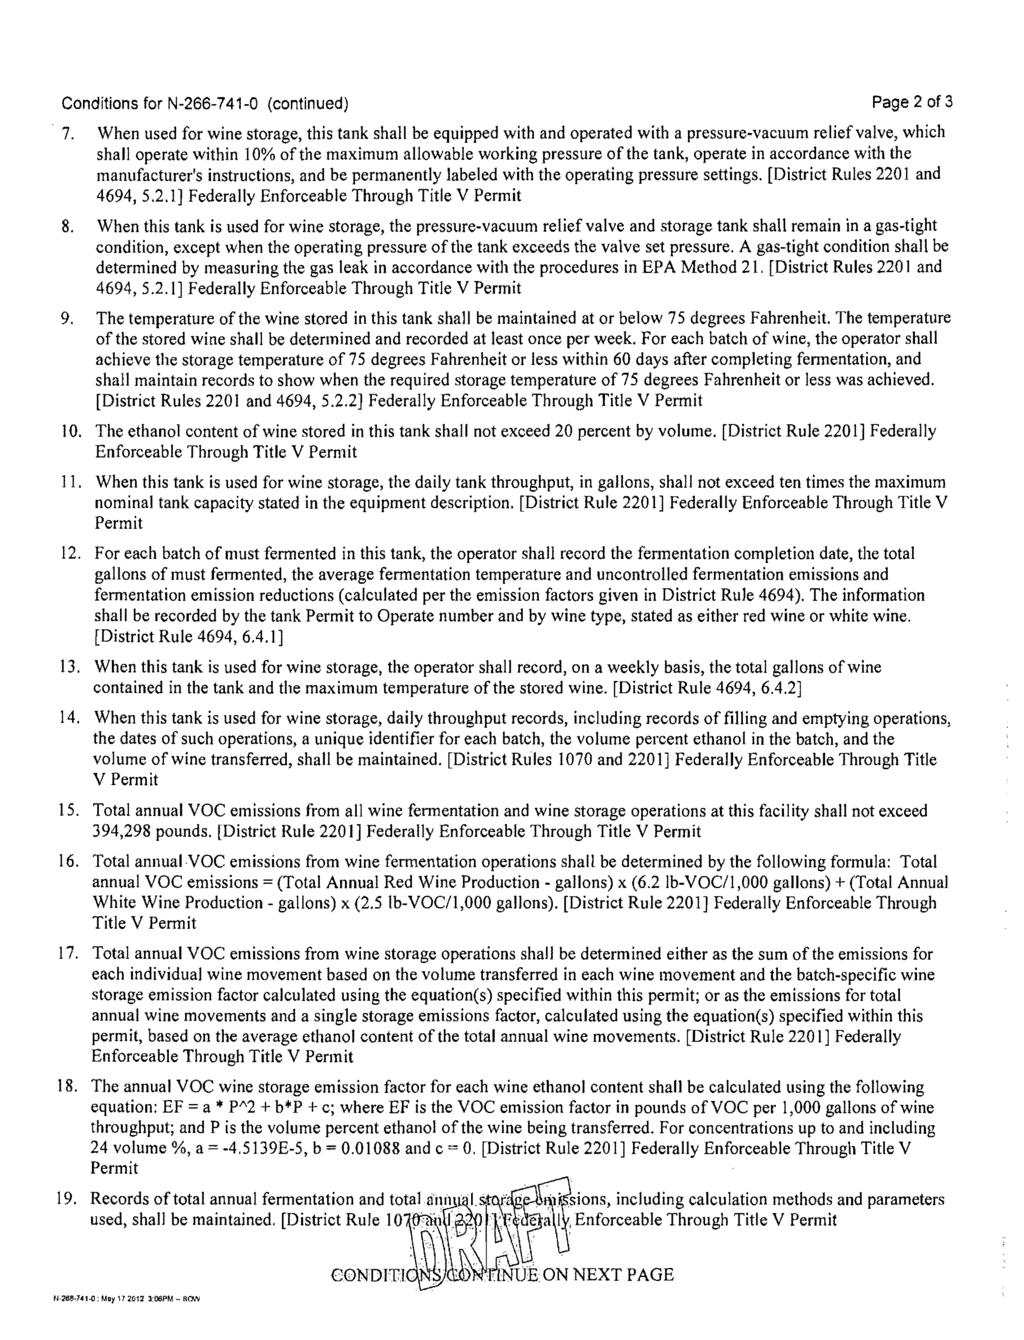 Conditions for N-266-741-0 (continued) Page 2 of 3. 7.